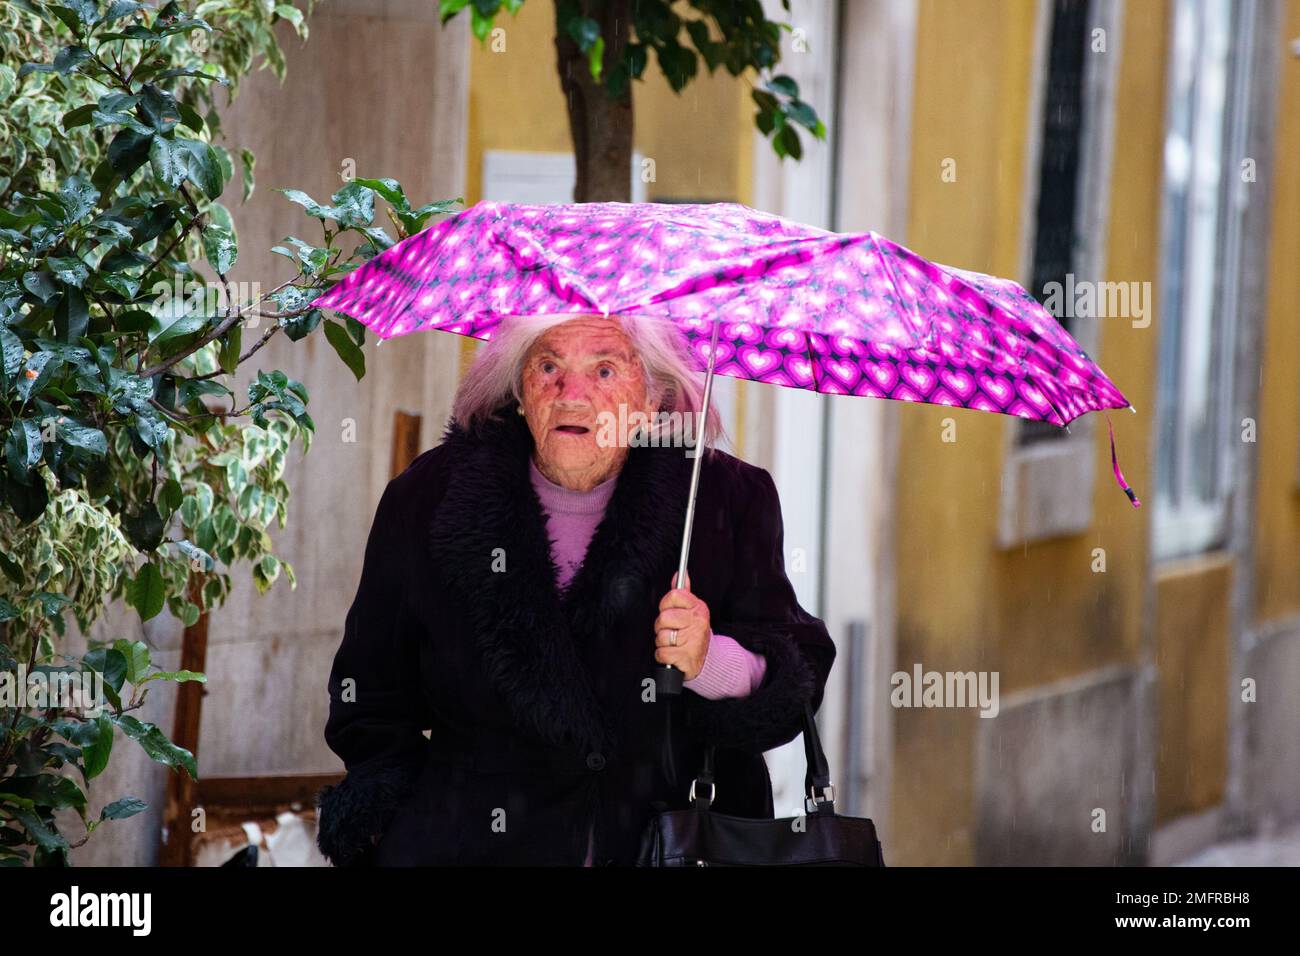 Elderly woman sheltering from the rain with an umbrella Stock Photo